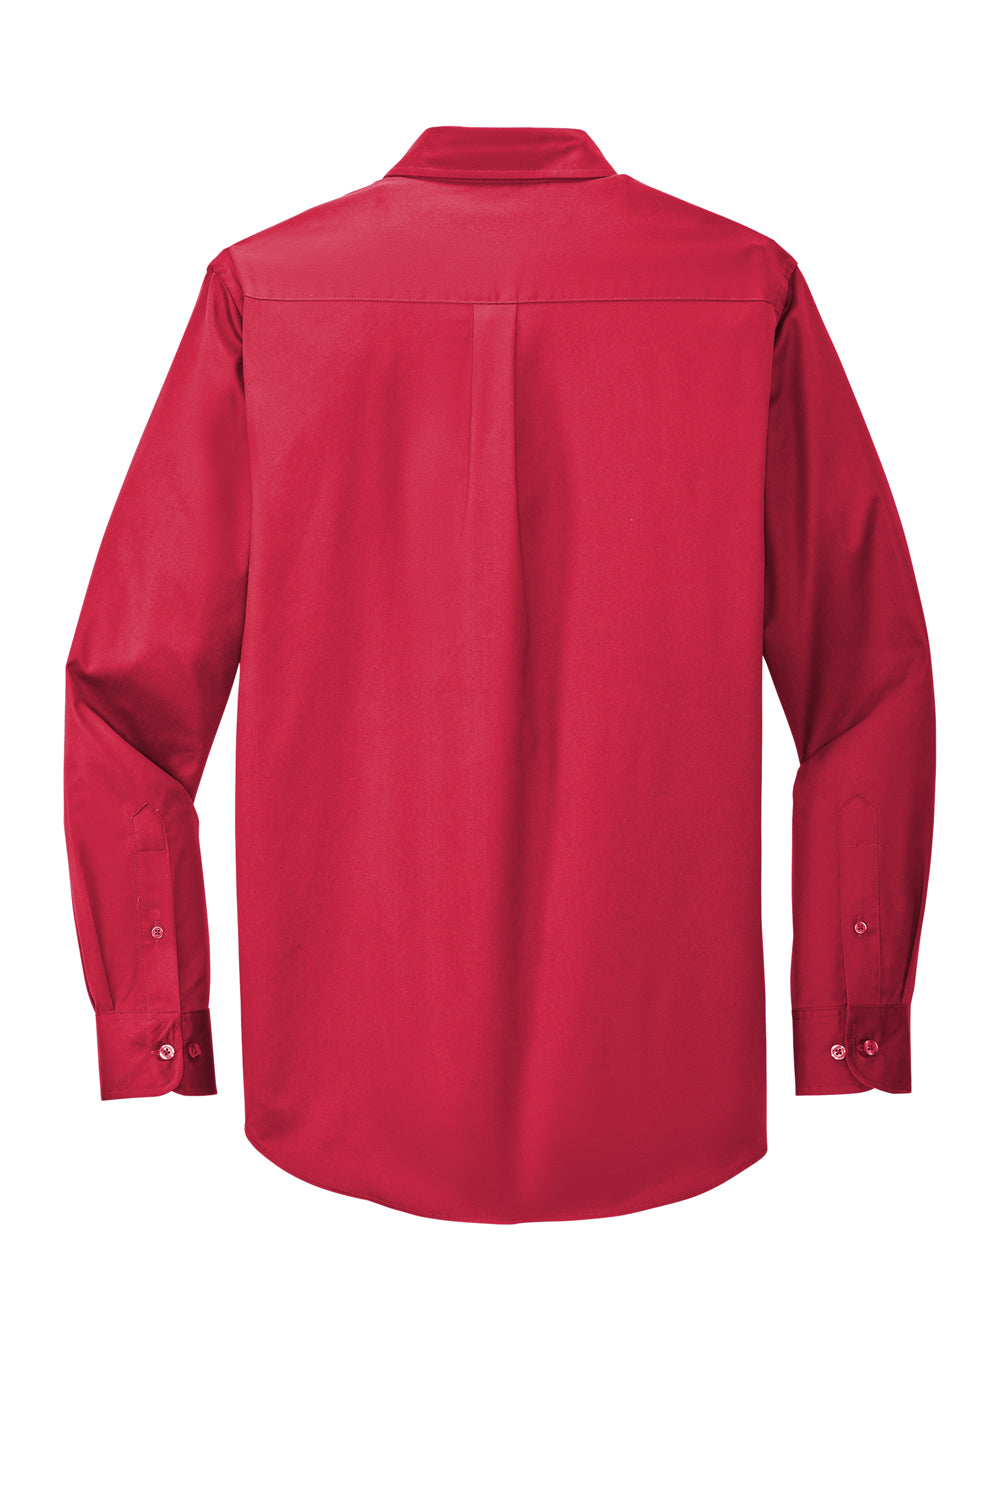 Port Authority S608/TLS608/S608ES Mens Easy Care Wrinkle Resistant Long Sleeve Button Down Shirt w/ Pocket Red Flat Back